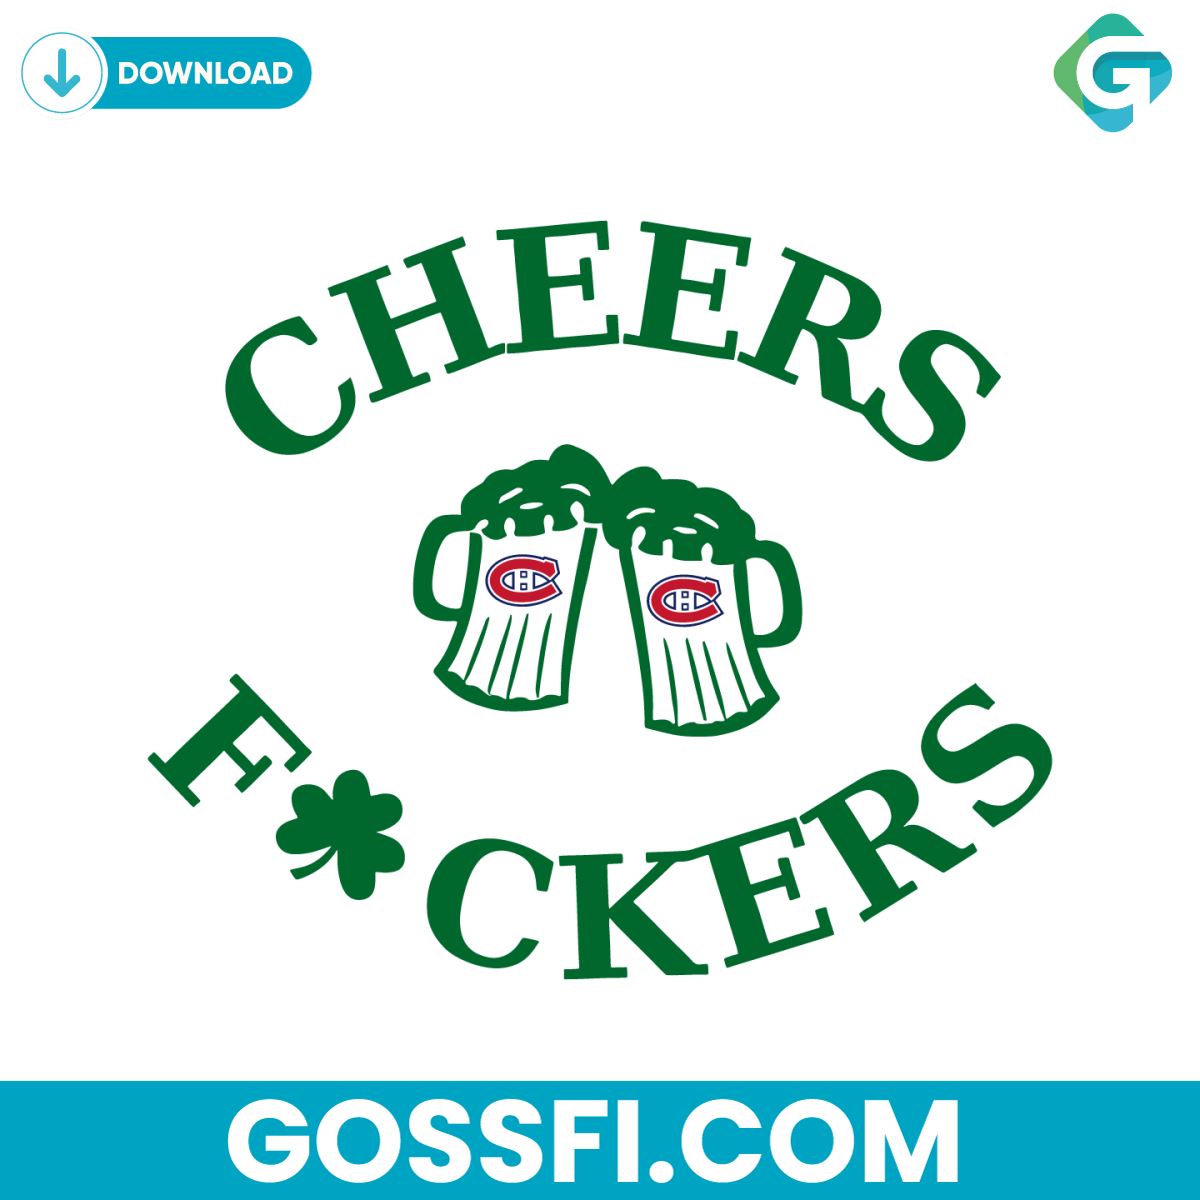 funny-st-patricks-day-cheers-fckers-montreal-canadiens-svg